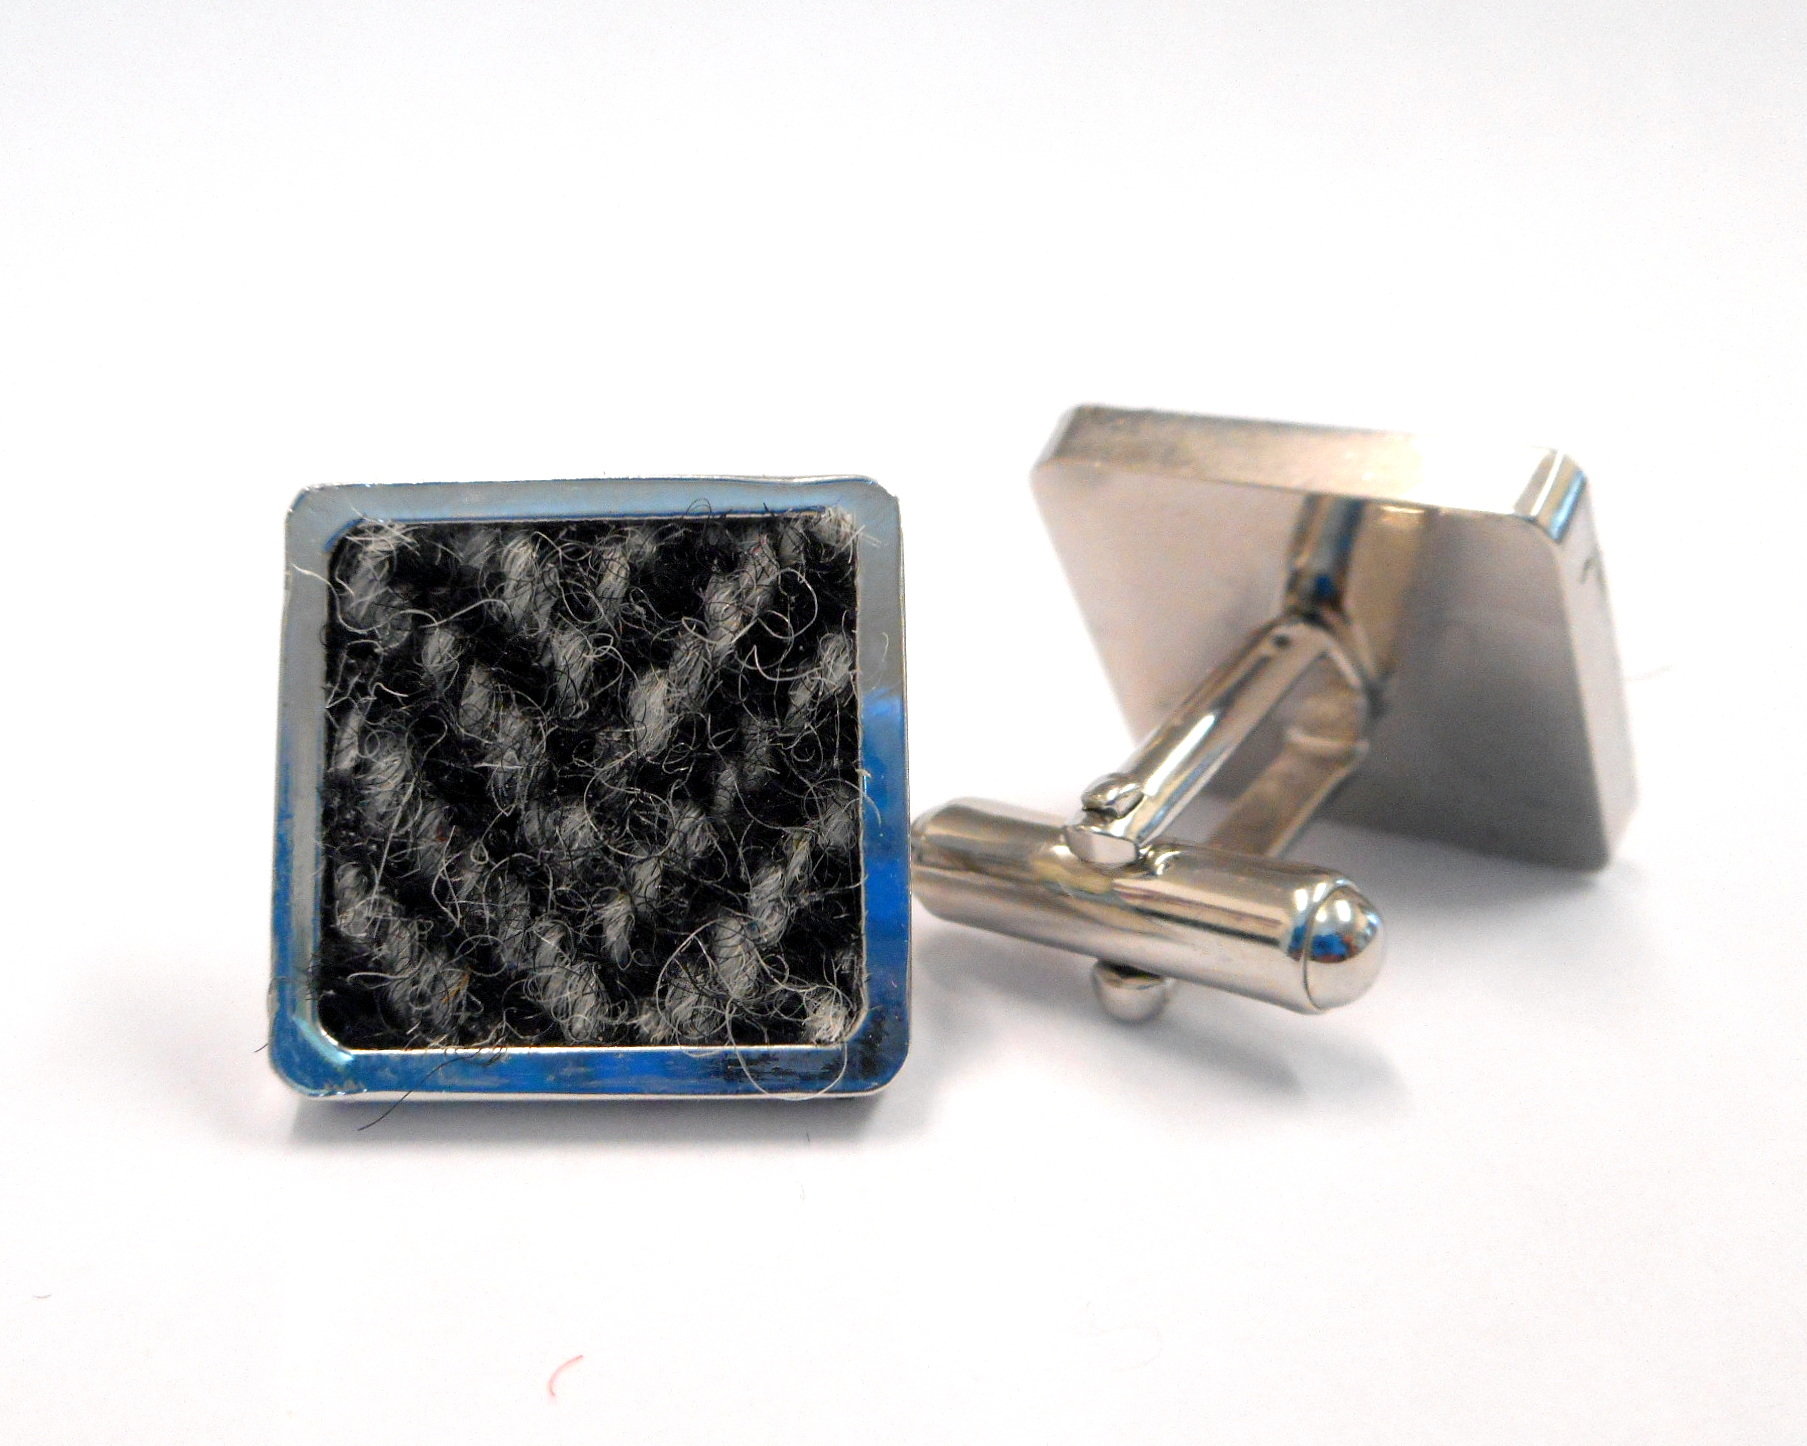 Harris Tweed square cuff links in traditional grey and black herringbone weave mens gift made in Scotland ideal for weddings